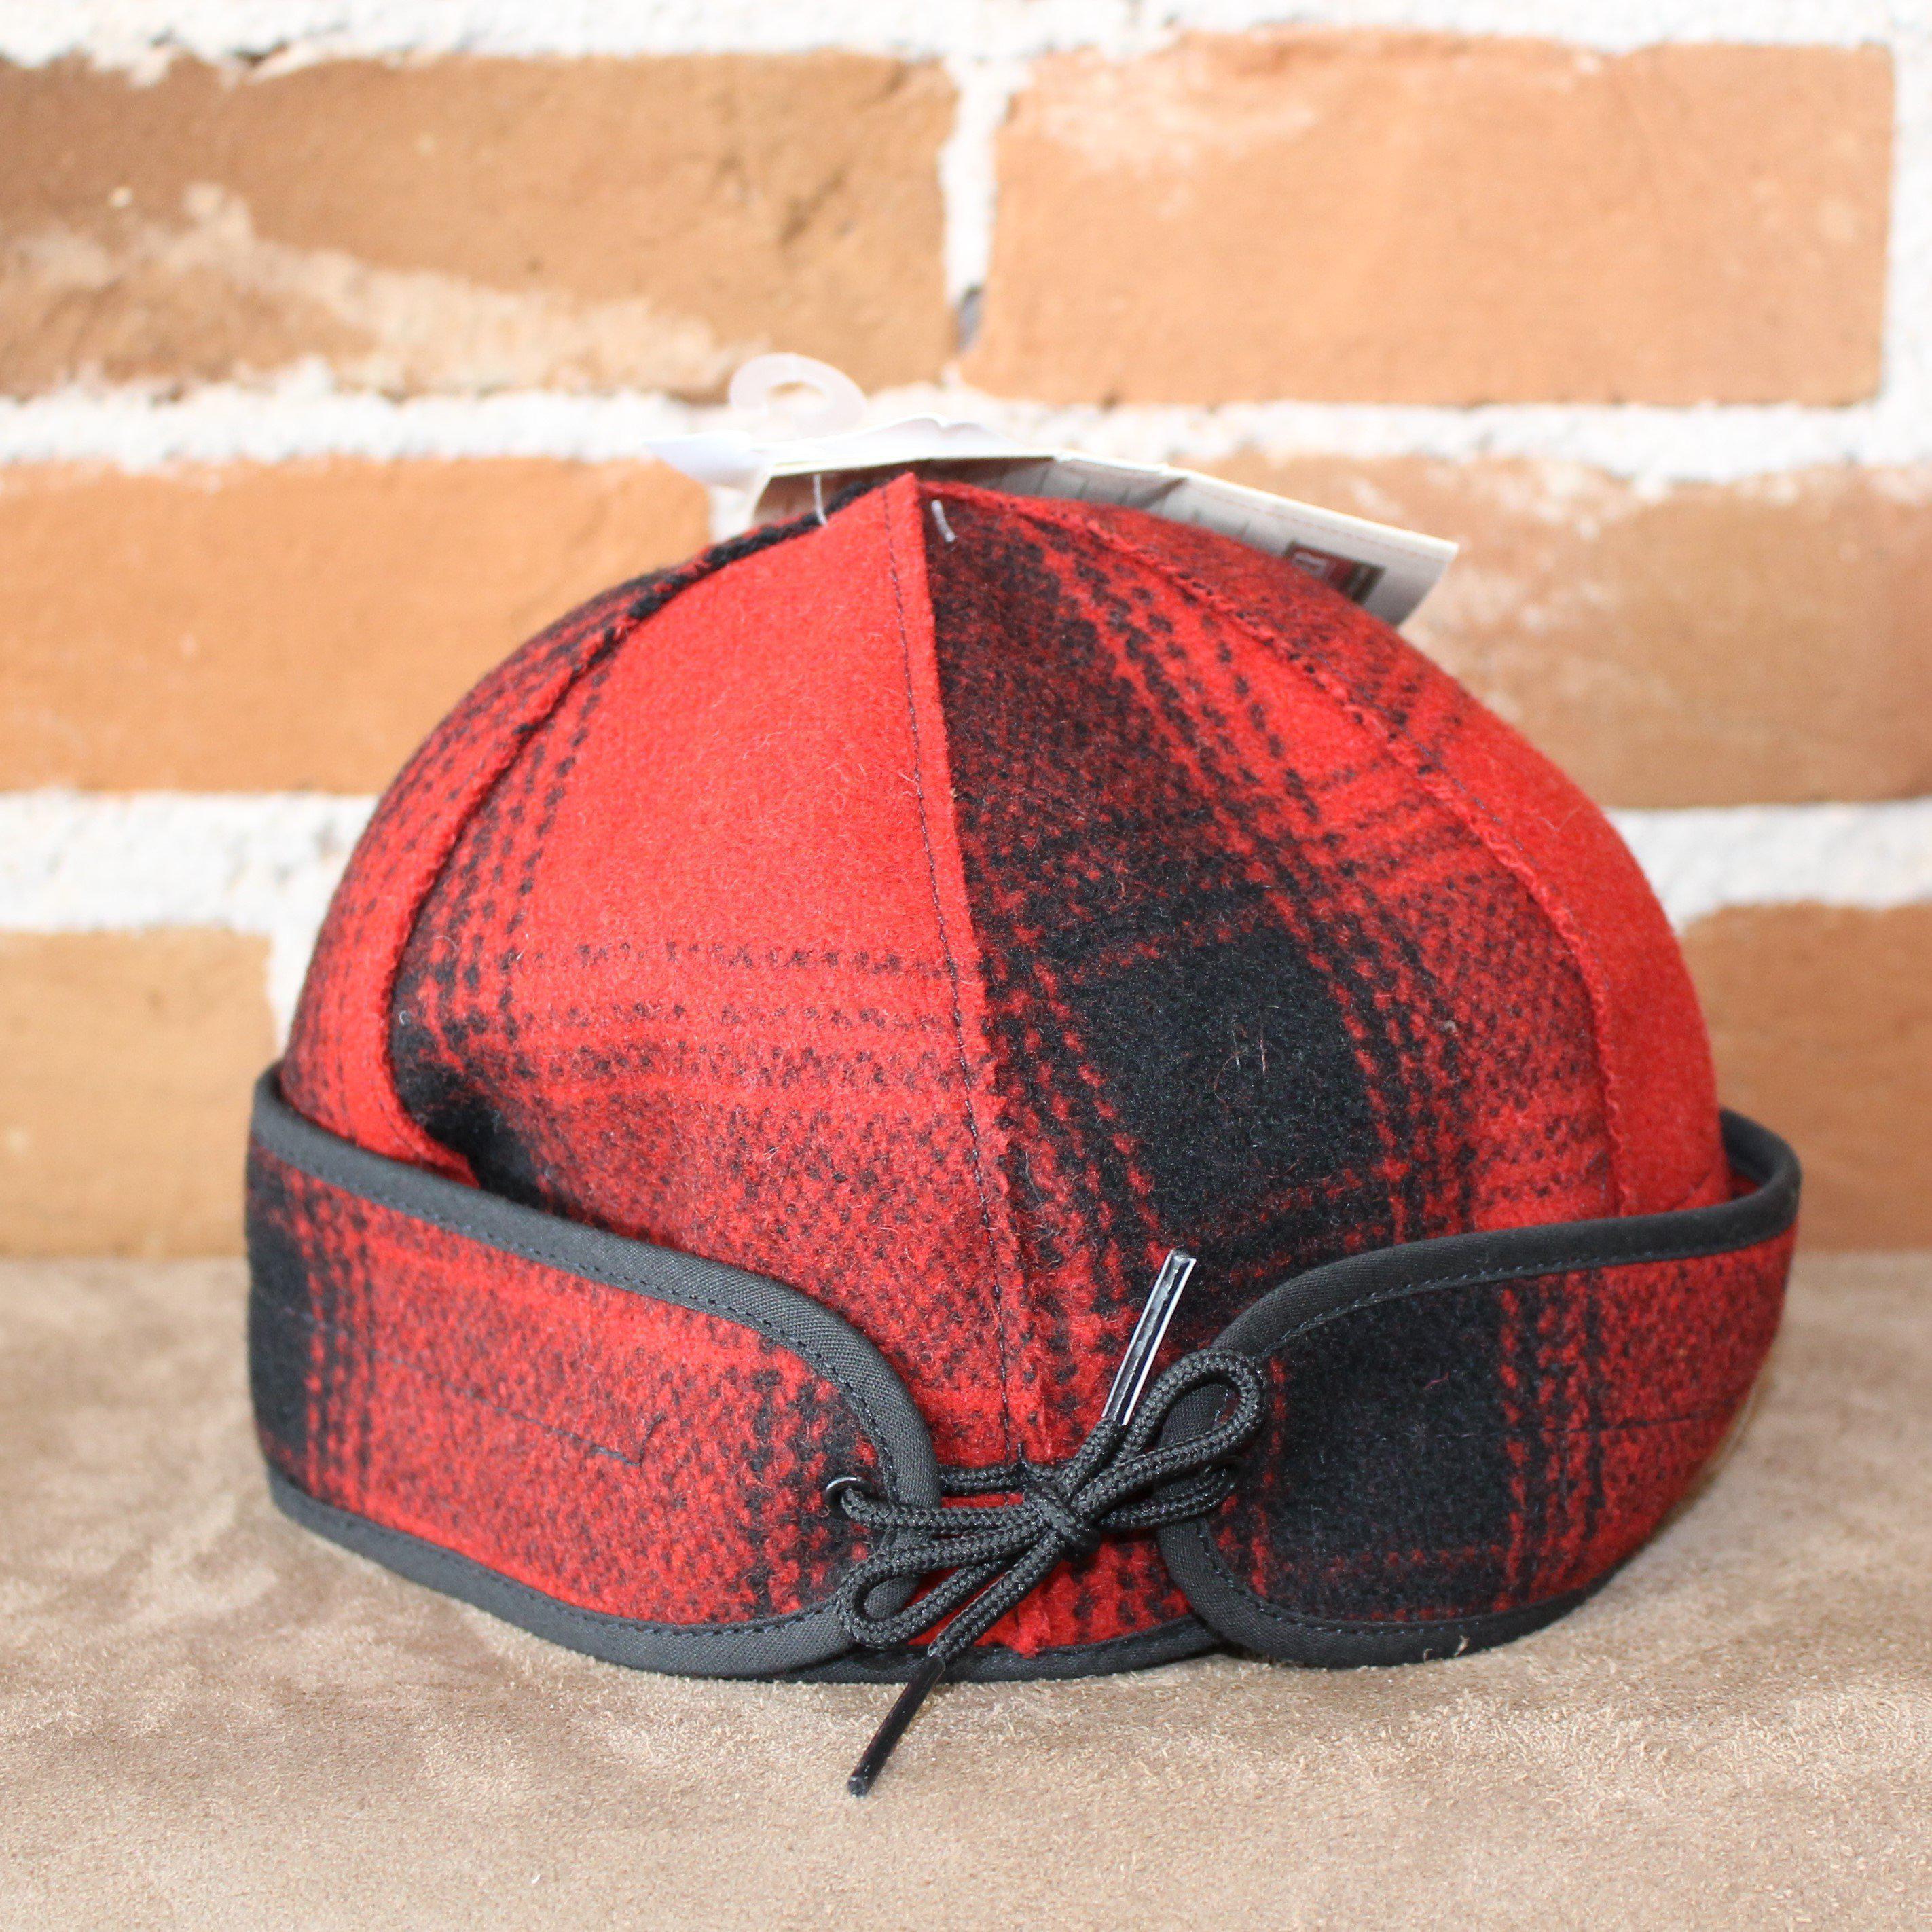 Brimless Cap Black – In Red Atomic 79 Plaid And